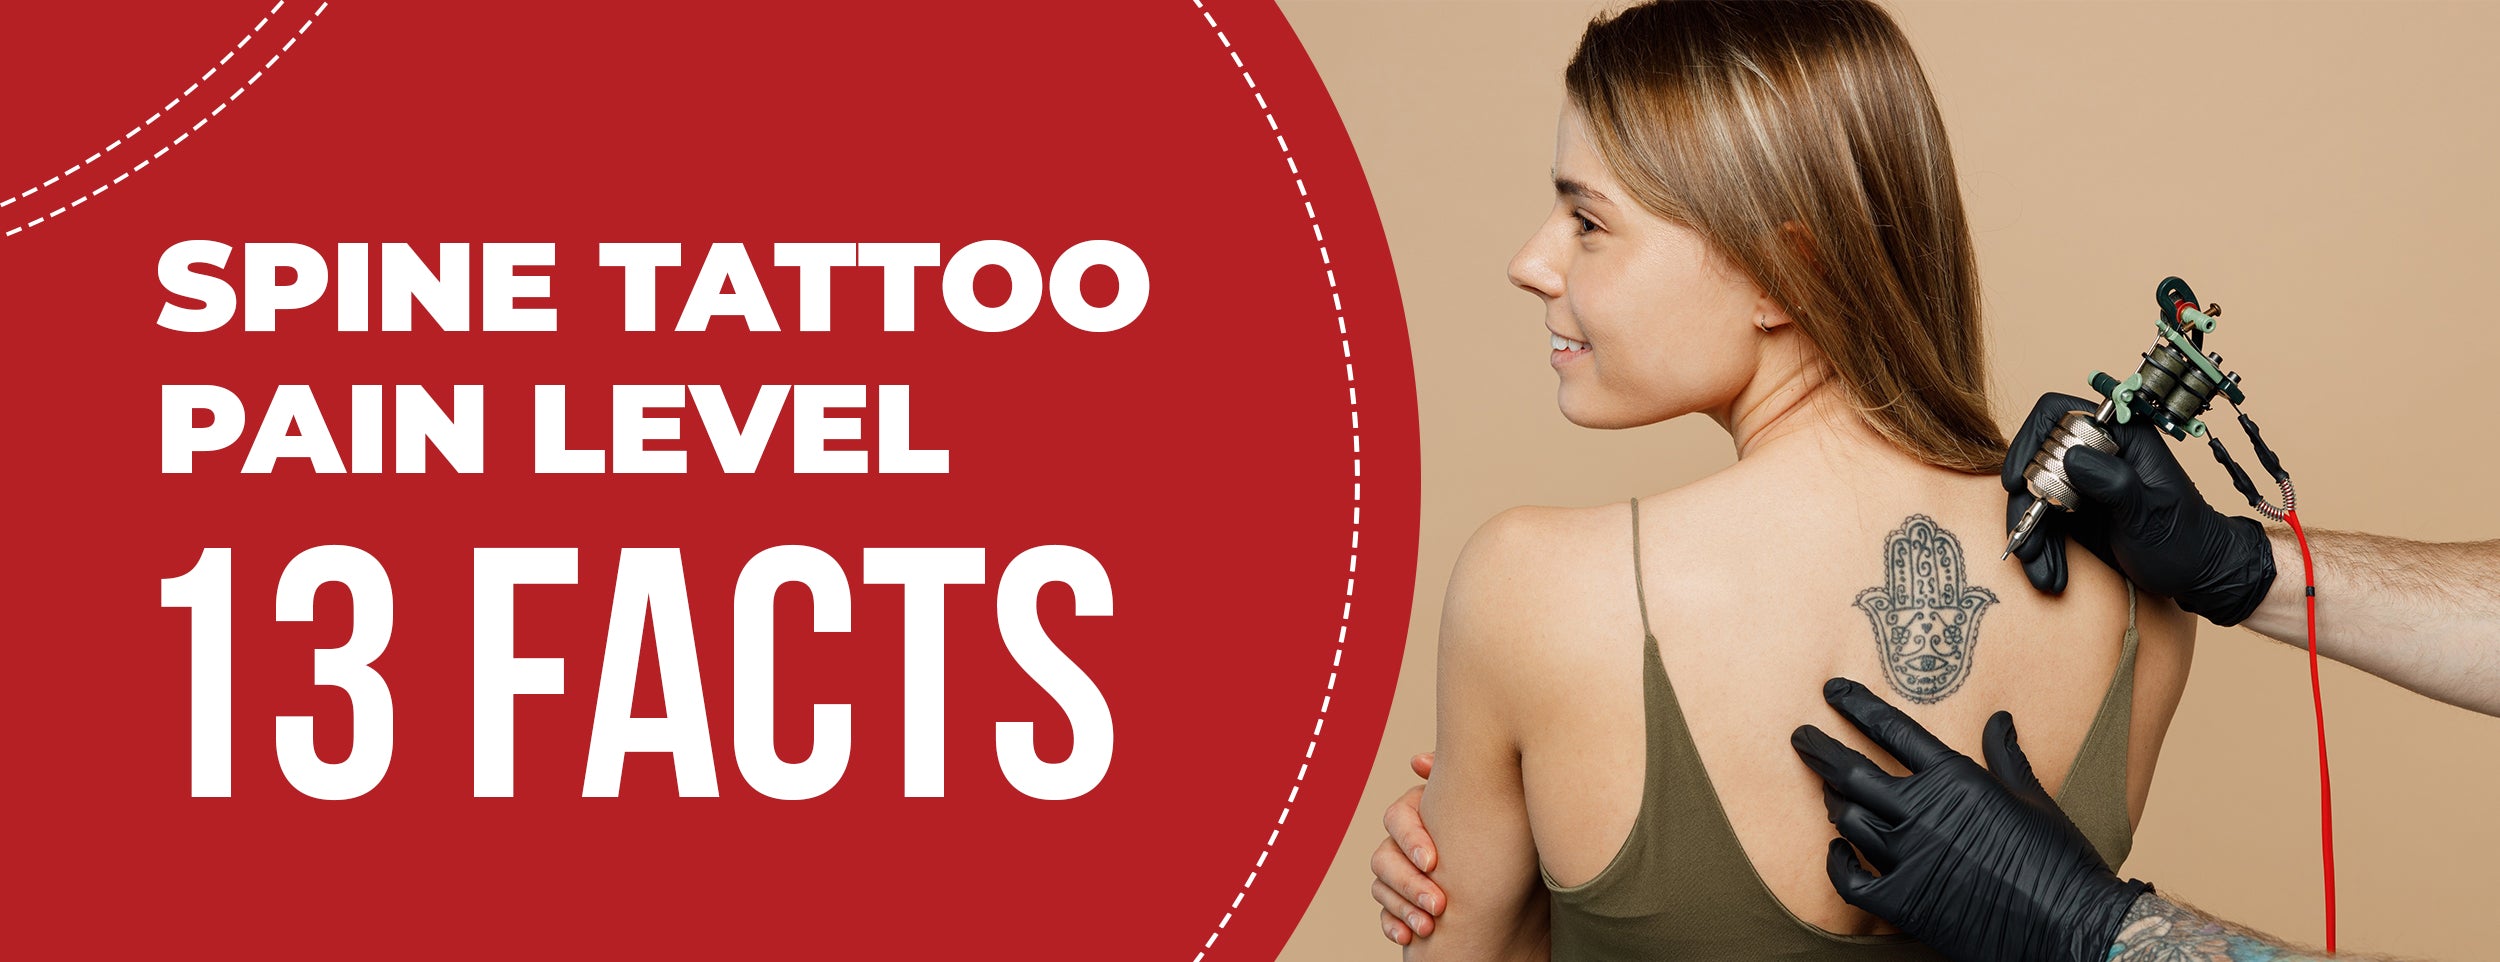 Spine Tattoo Pain Level 13 Facts